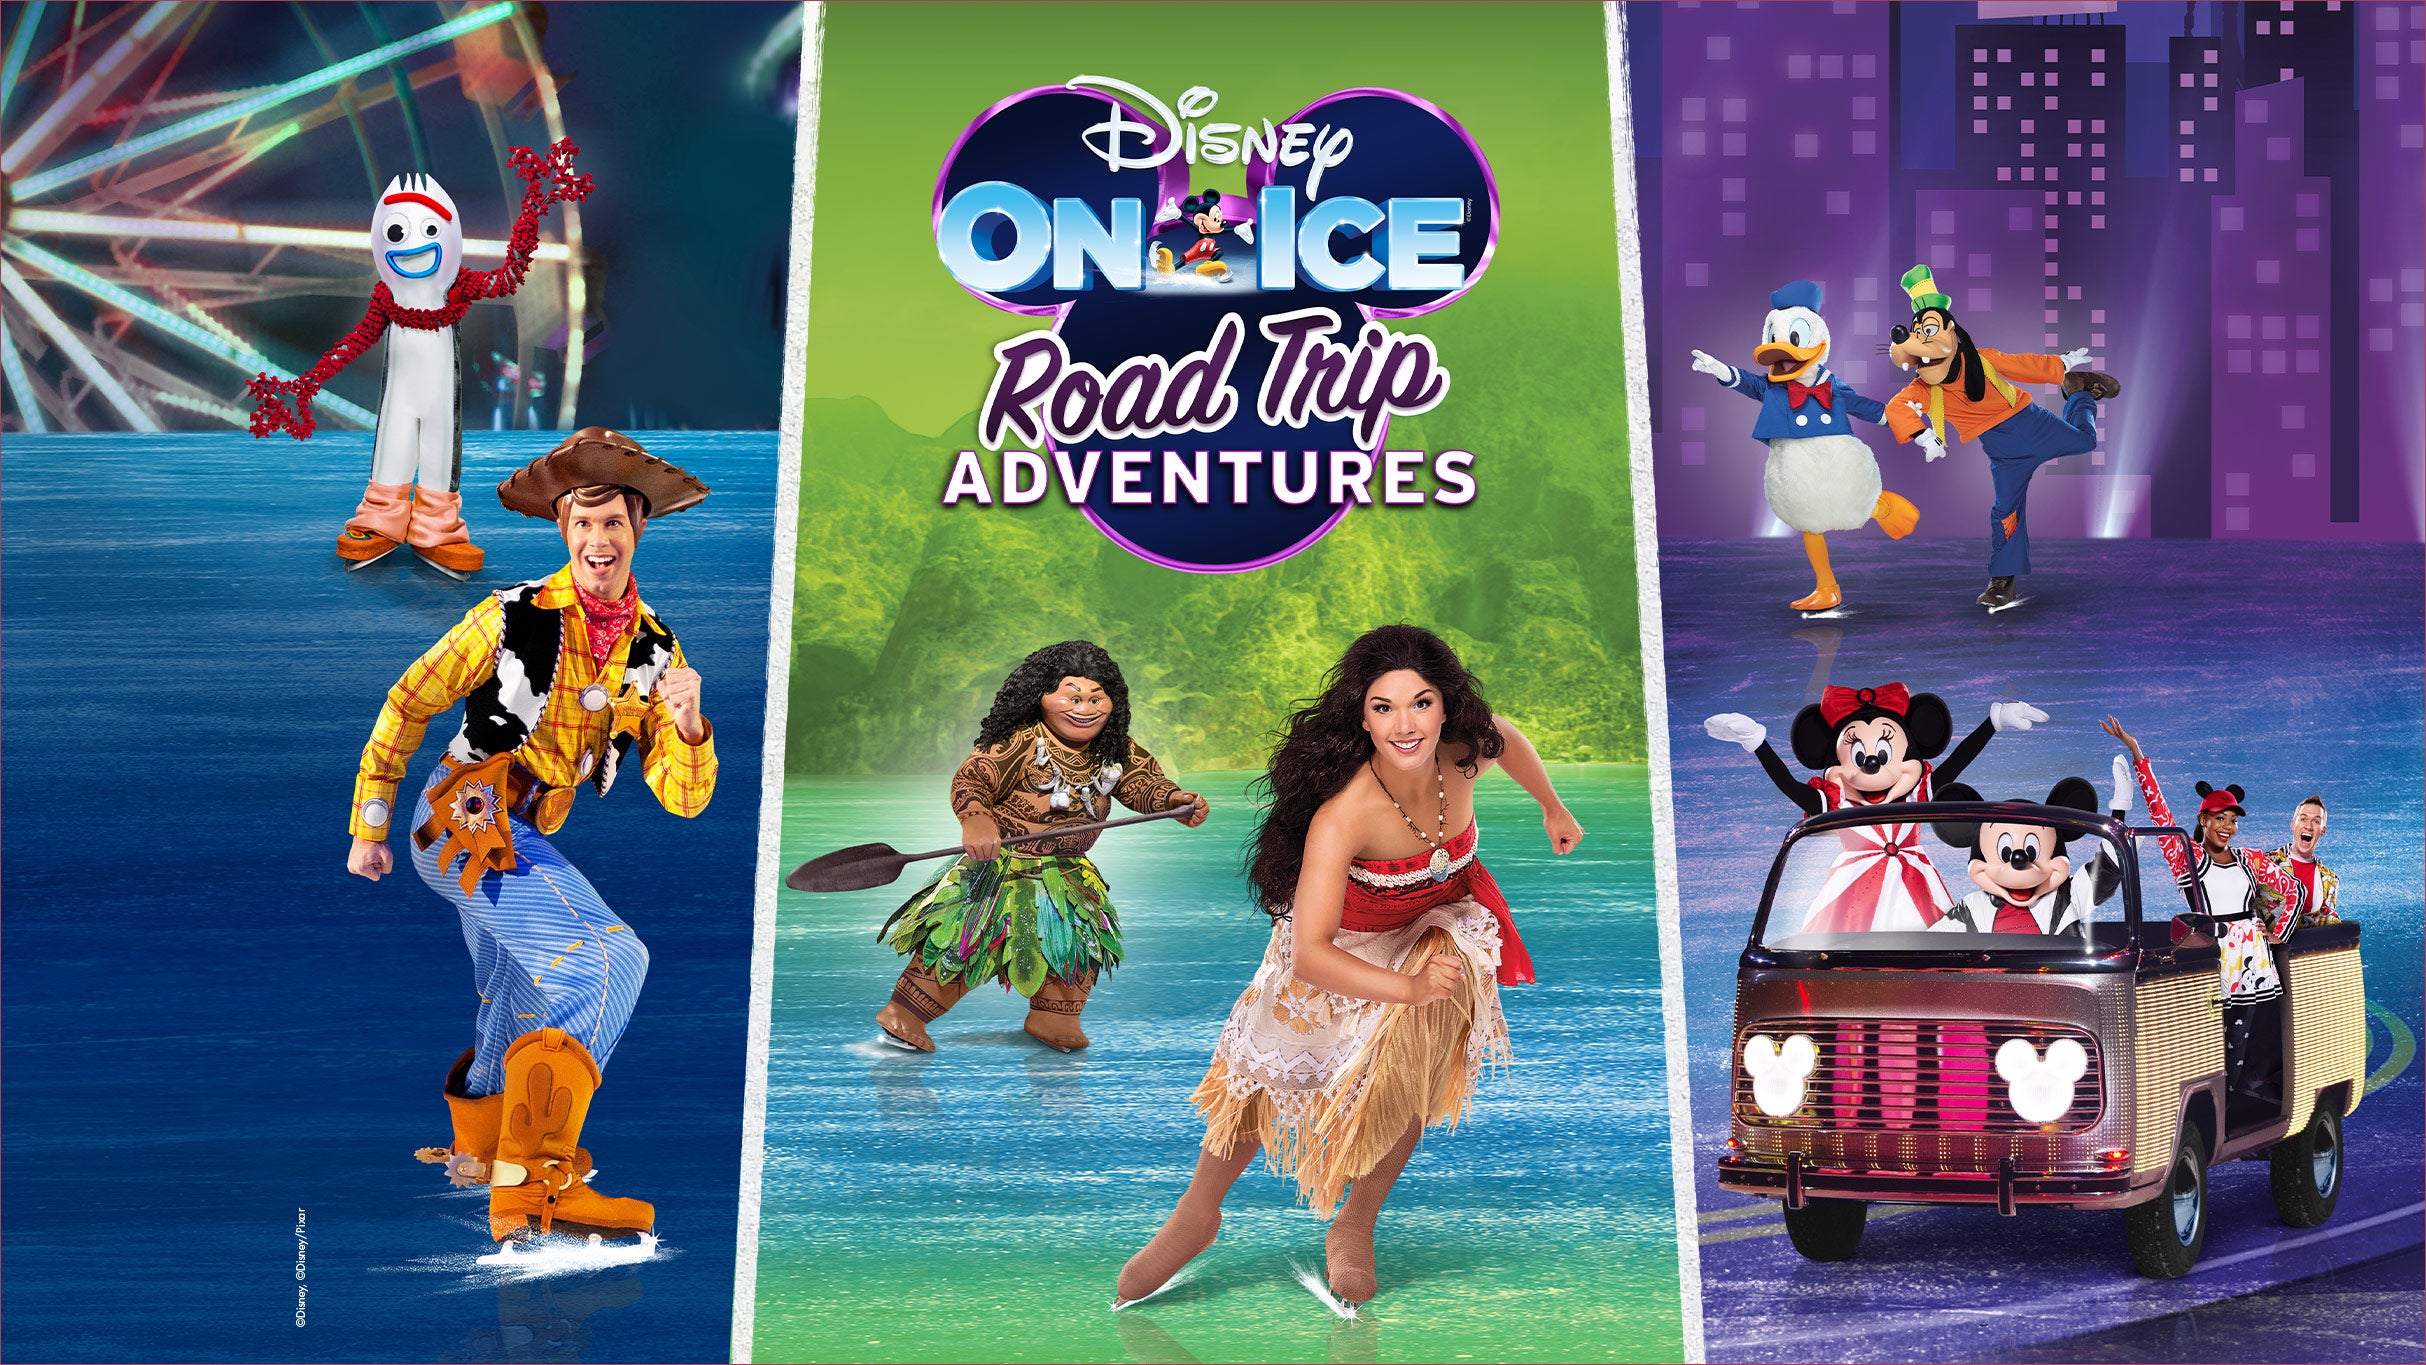 Disney On Ice presents Road Trip Adventures in Manchester promo photo for Ticketmaster presale offer code